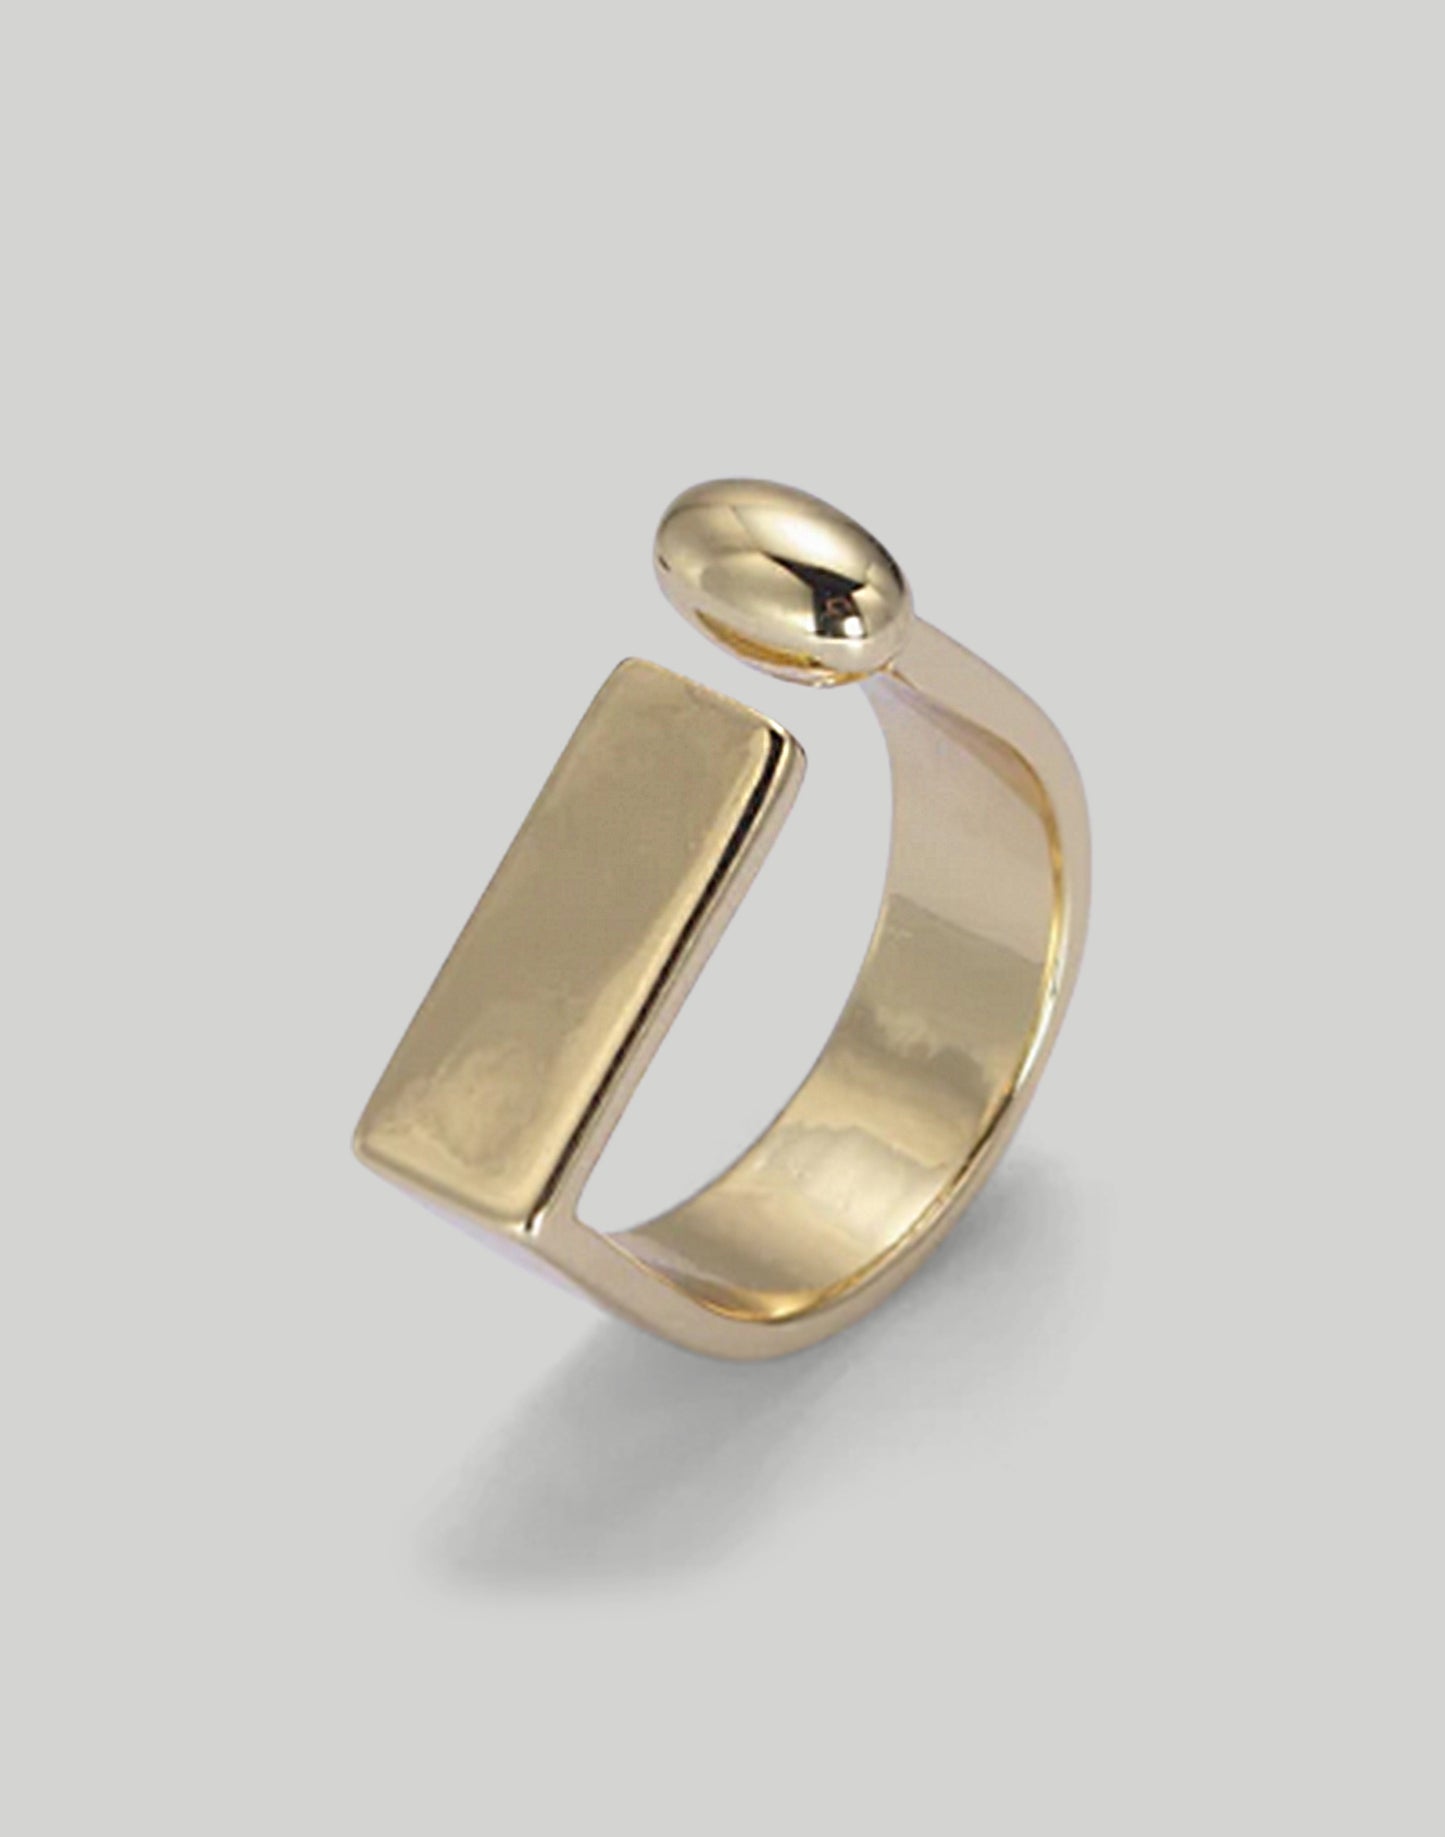 The Rectangle Signet Ring